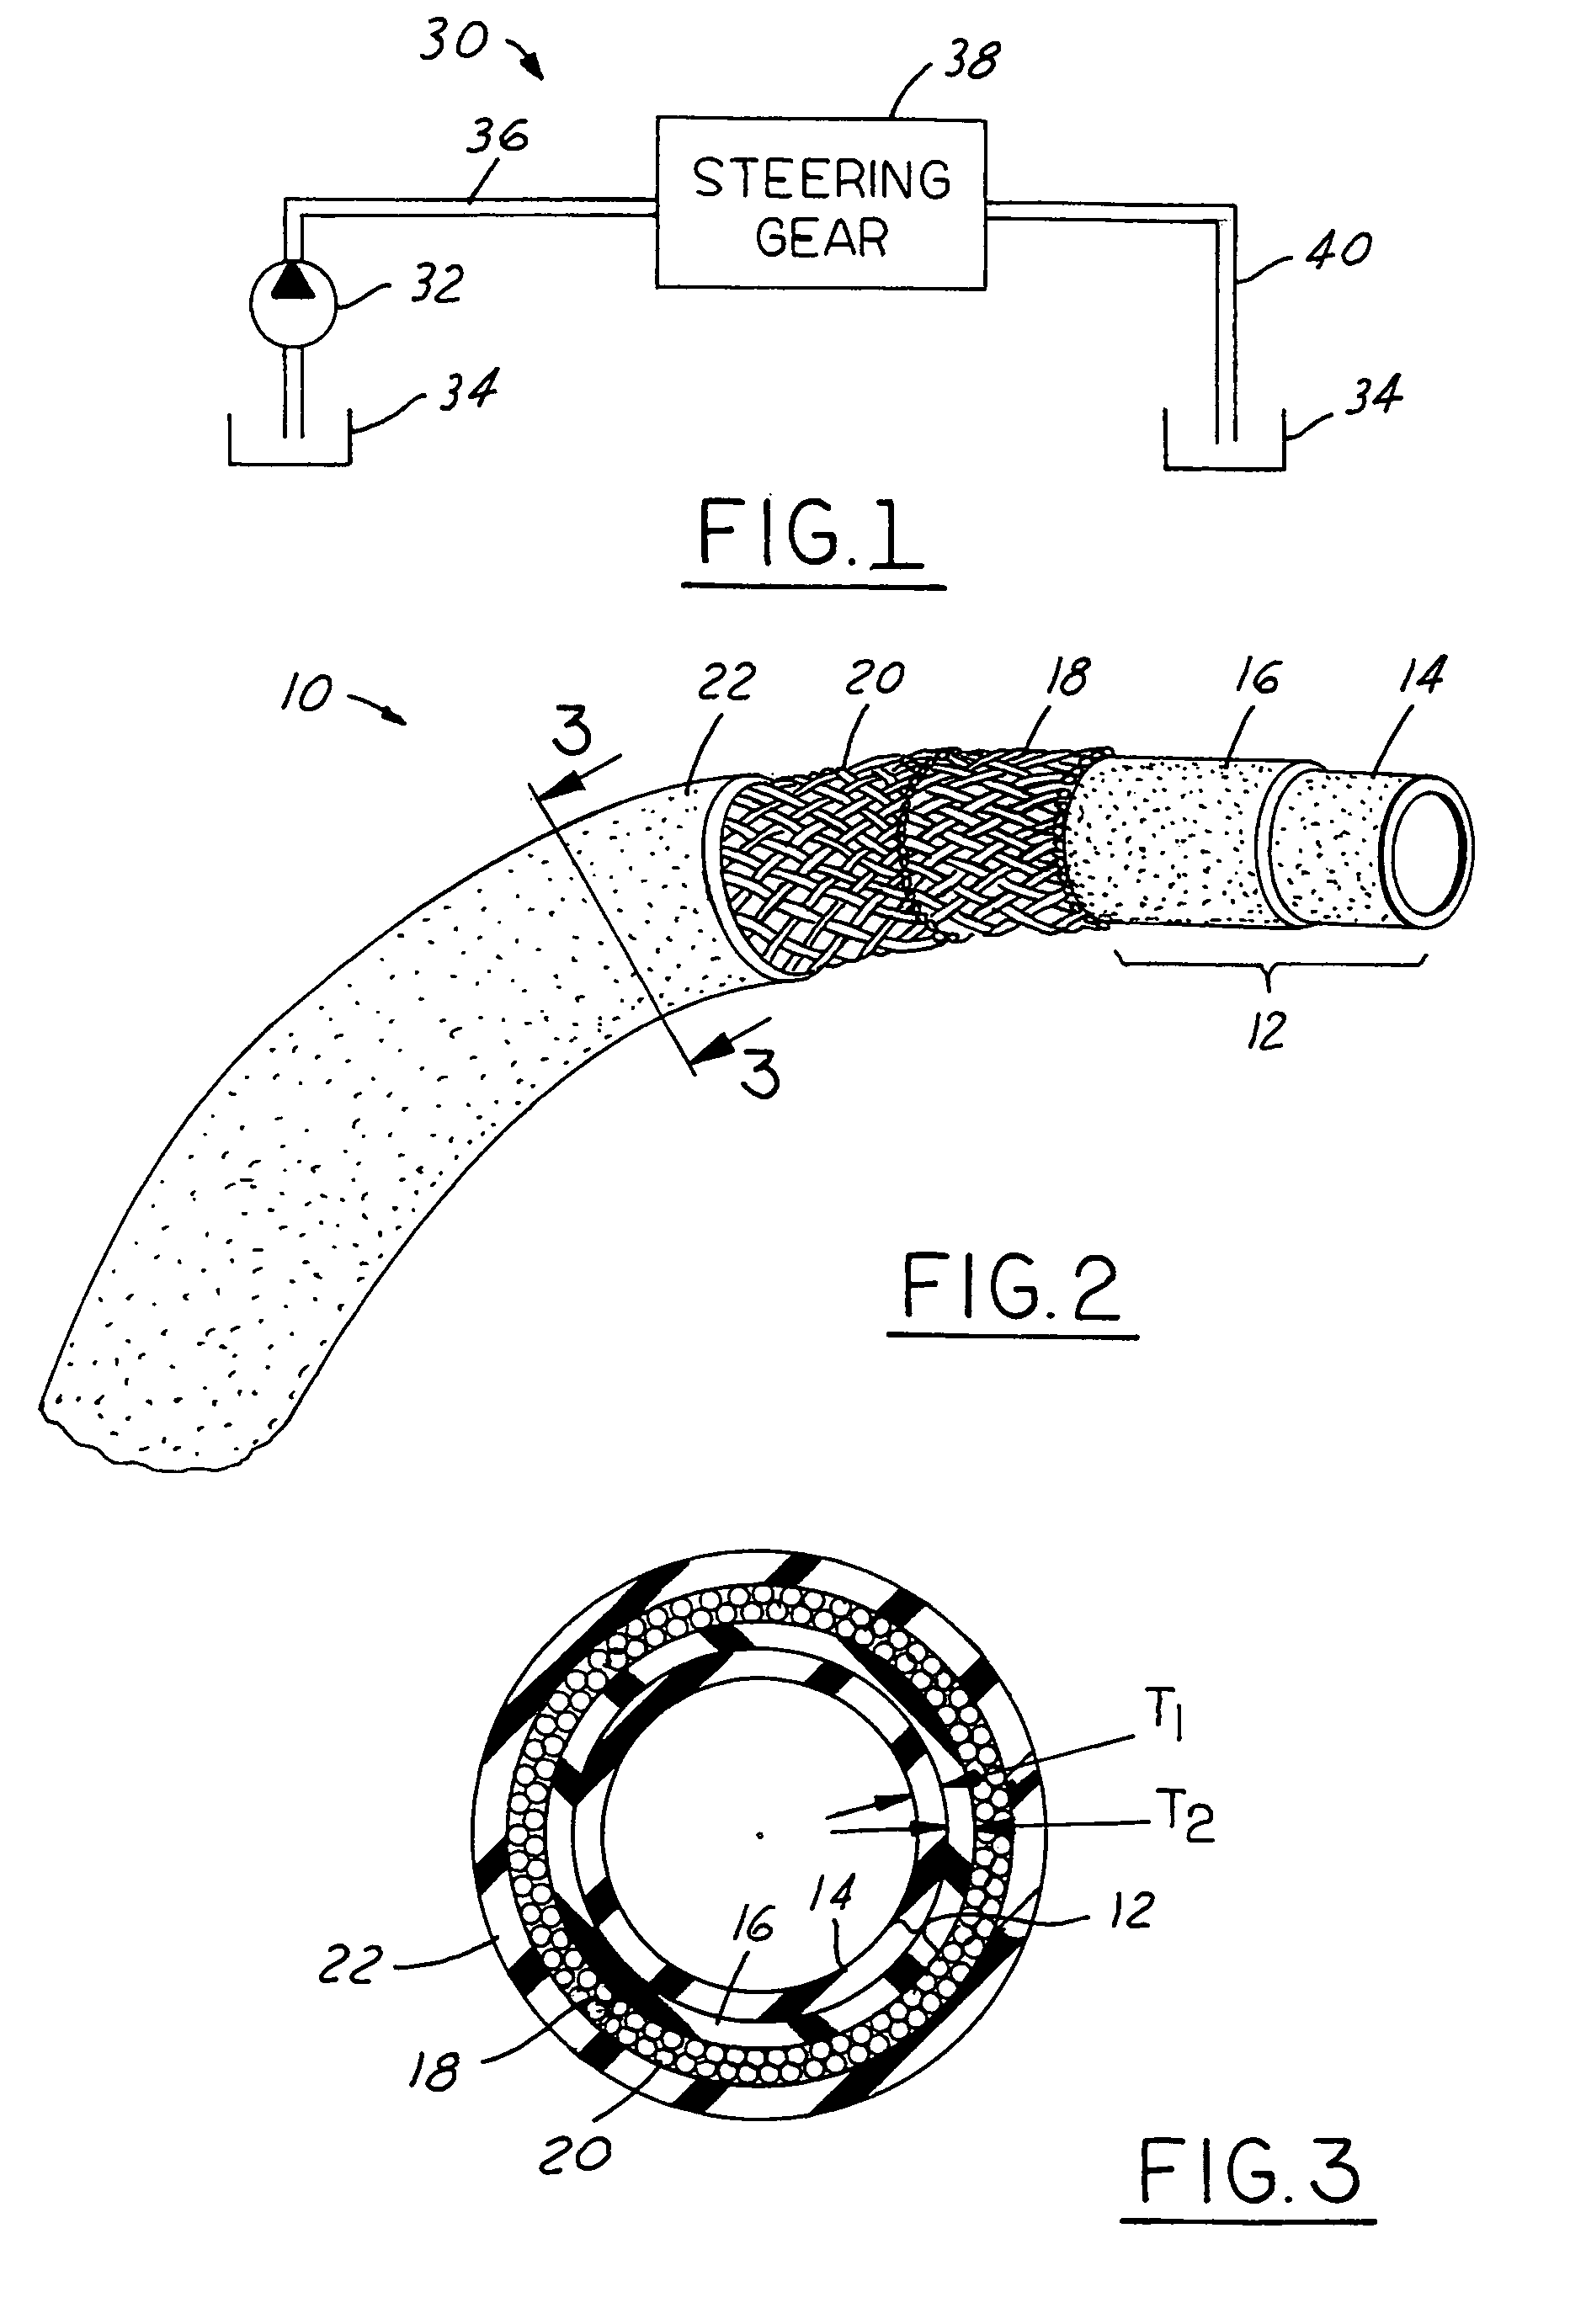 Fluid-borne noise suppression in an automotive power steering system